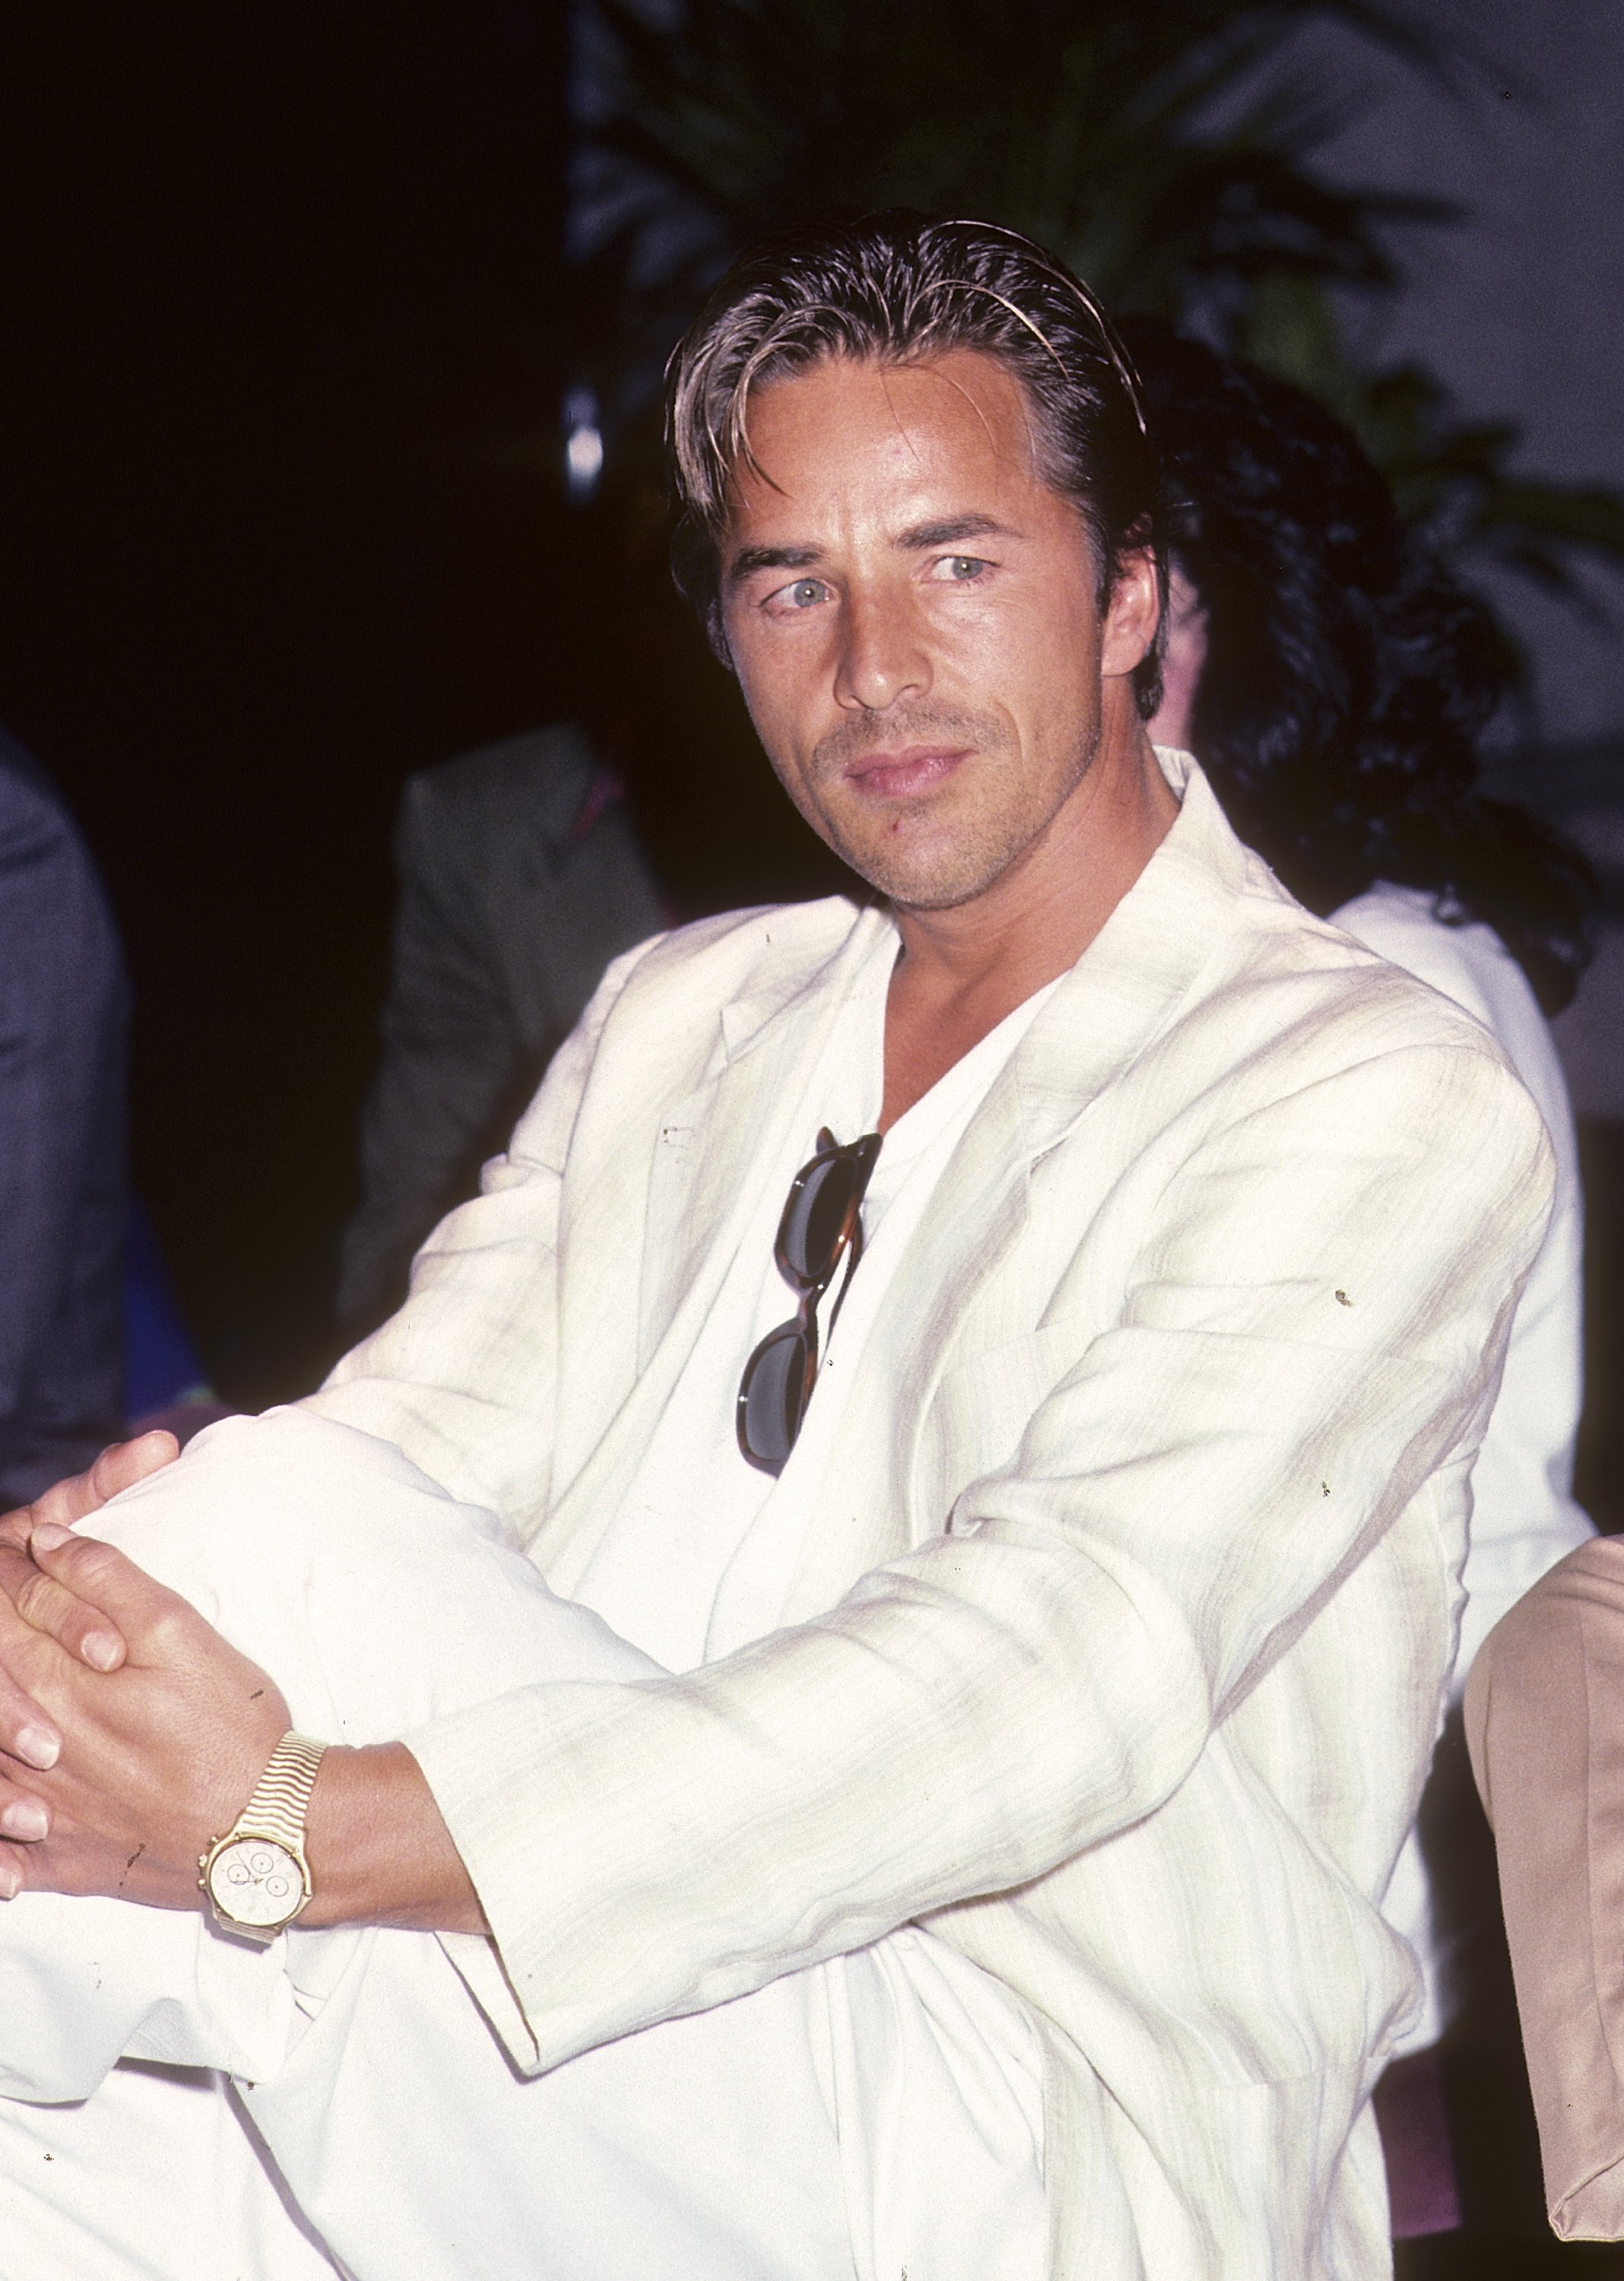 Don Johnson attends the "Miami Vice" Press Conference on June 14, 1985 at Visage in New York City | Source: Getty Images